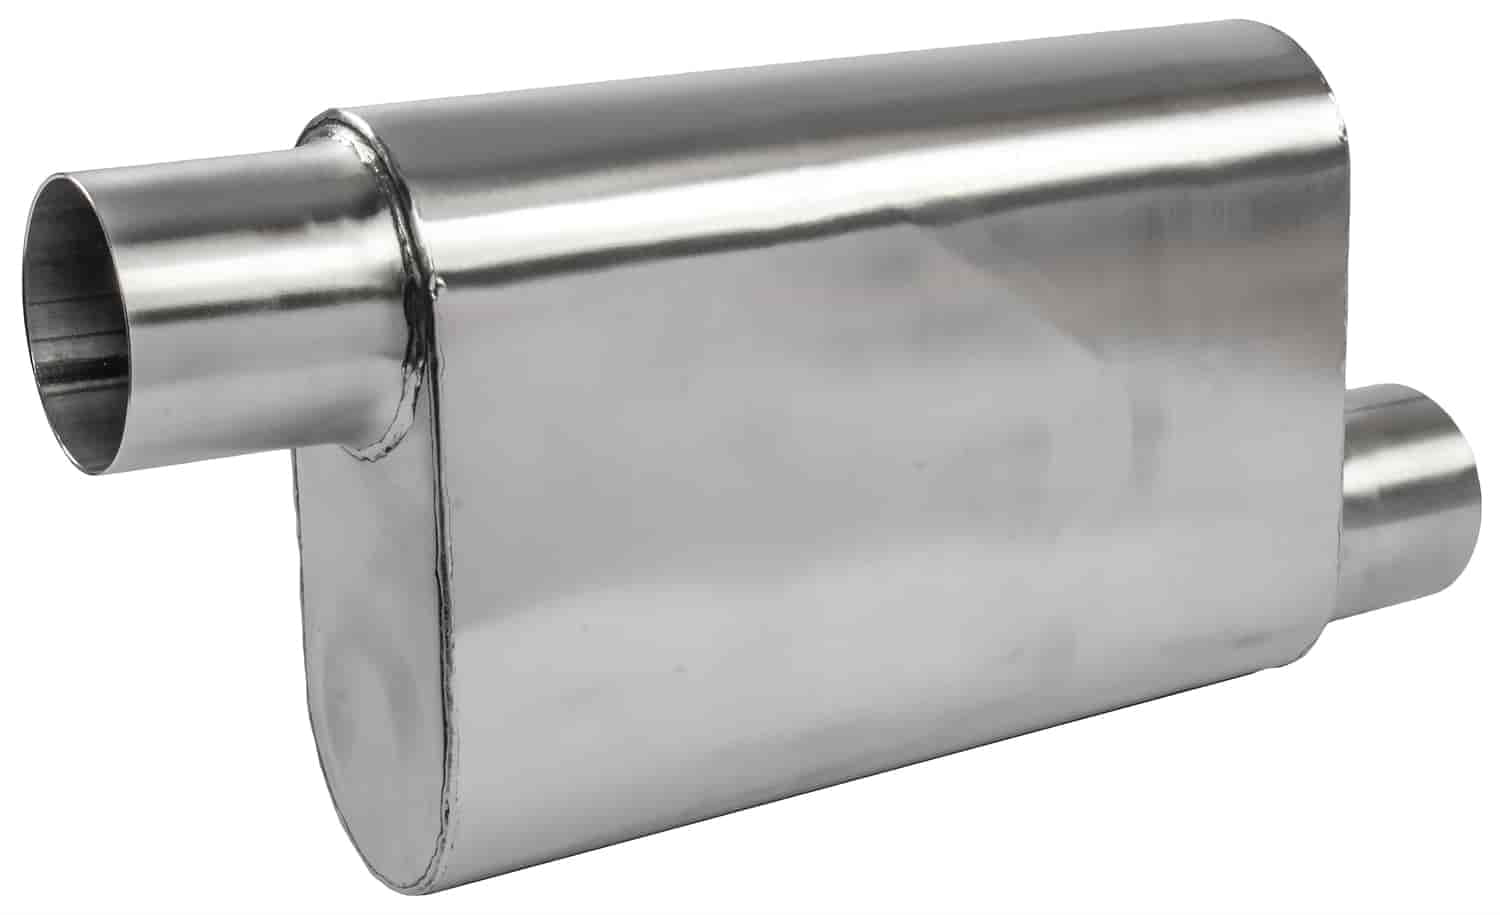 2.5” Dual Inlet/Dual Outlet Diameter JEGS Chambered Deep-Tone Muffler Overall Length Of 19” Stainless Steel Muffler Body: 9” Wide x 4” High x 13” Long